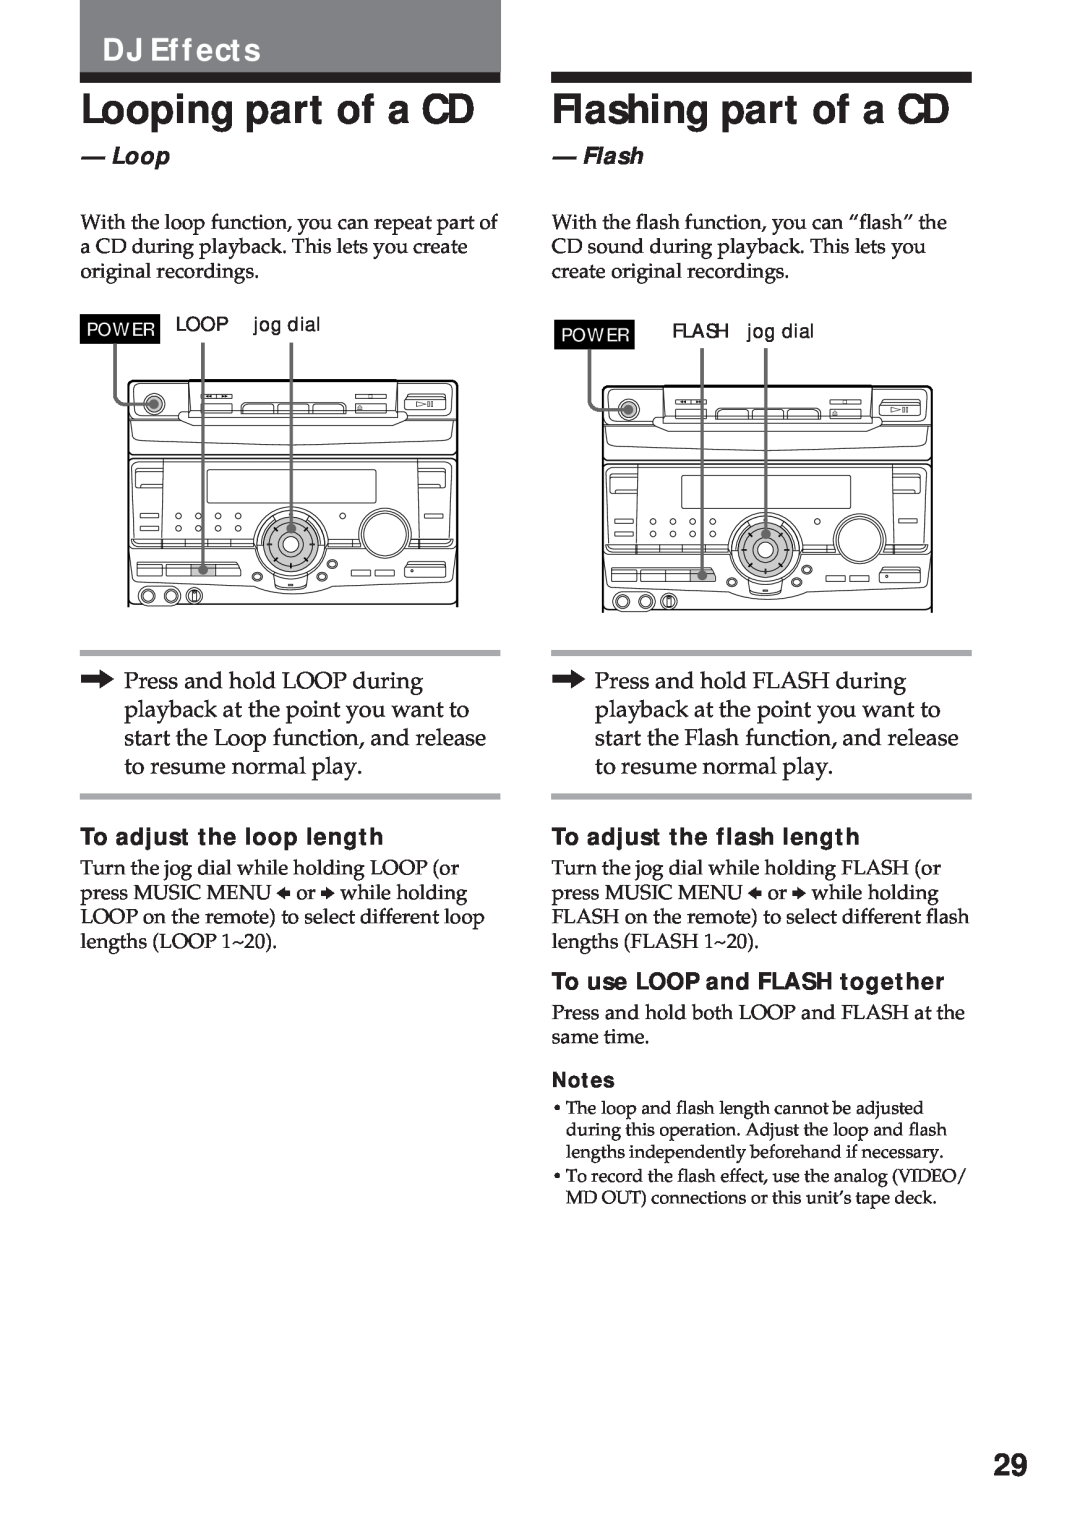 Sony MHC-RX100AV operating instructions Looping part of a CD, Flashing part of a CD, DJ Effects, To adjust the loop length 